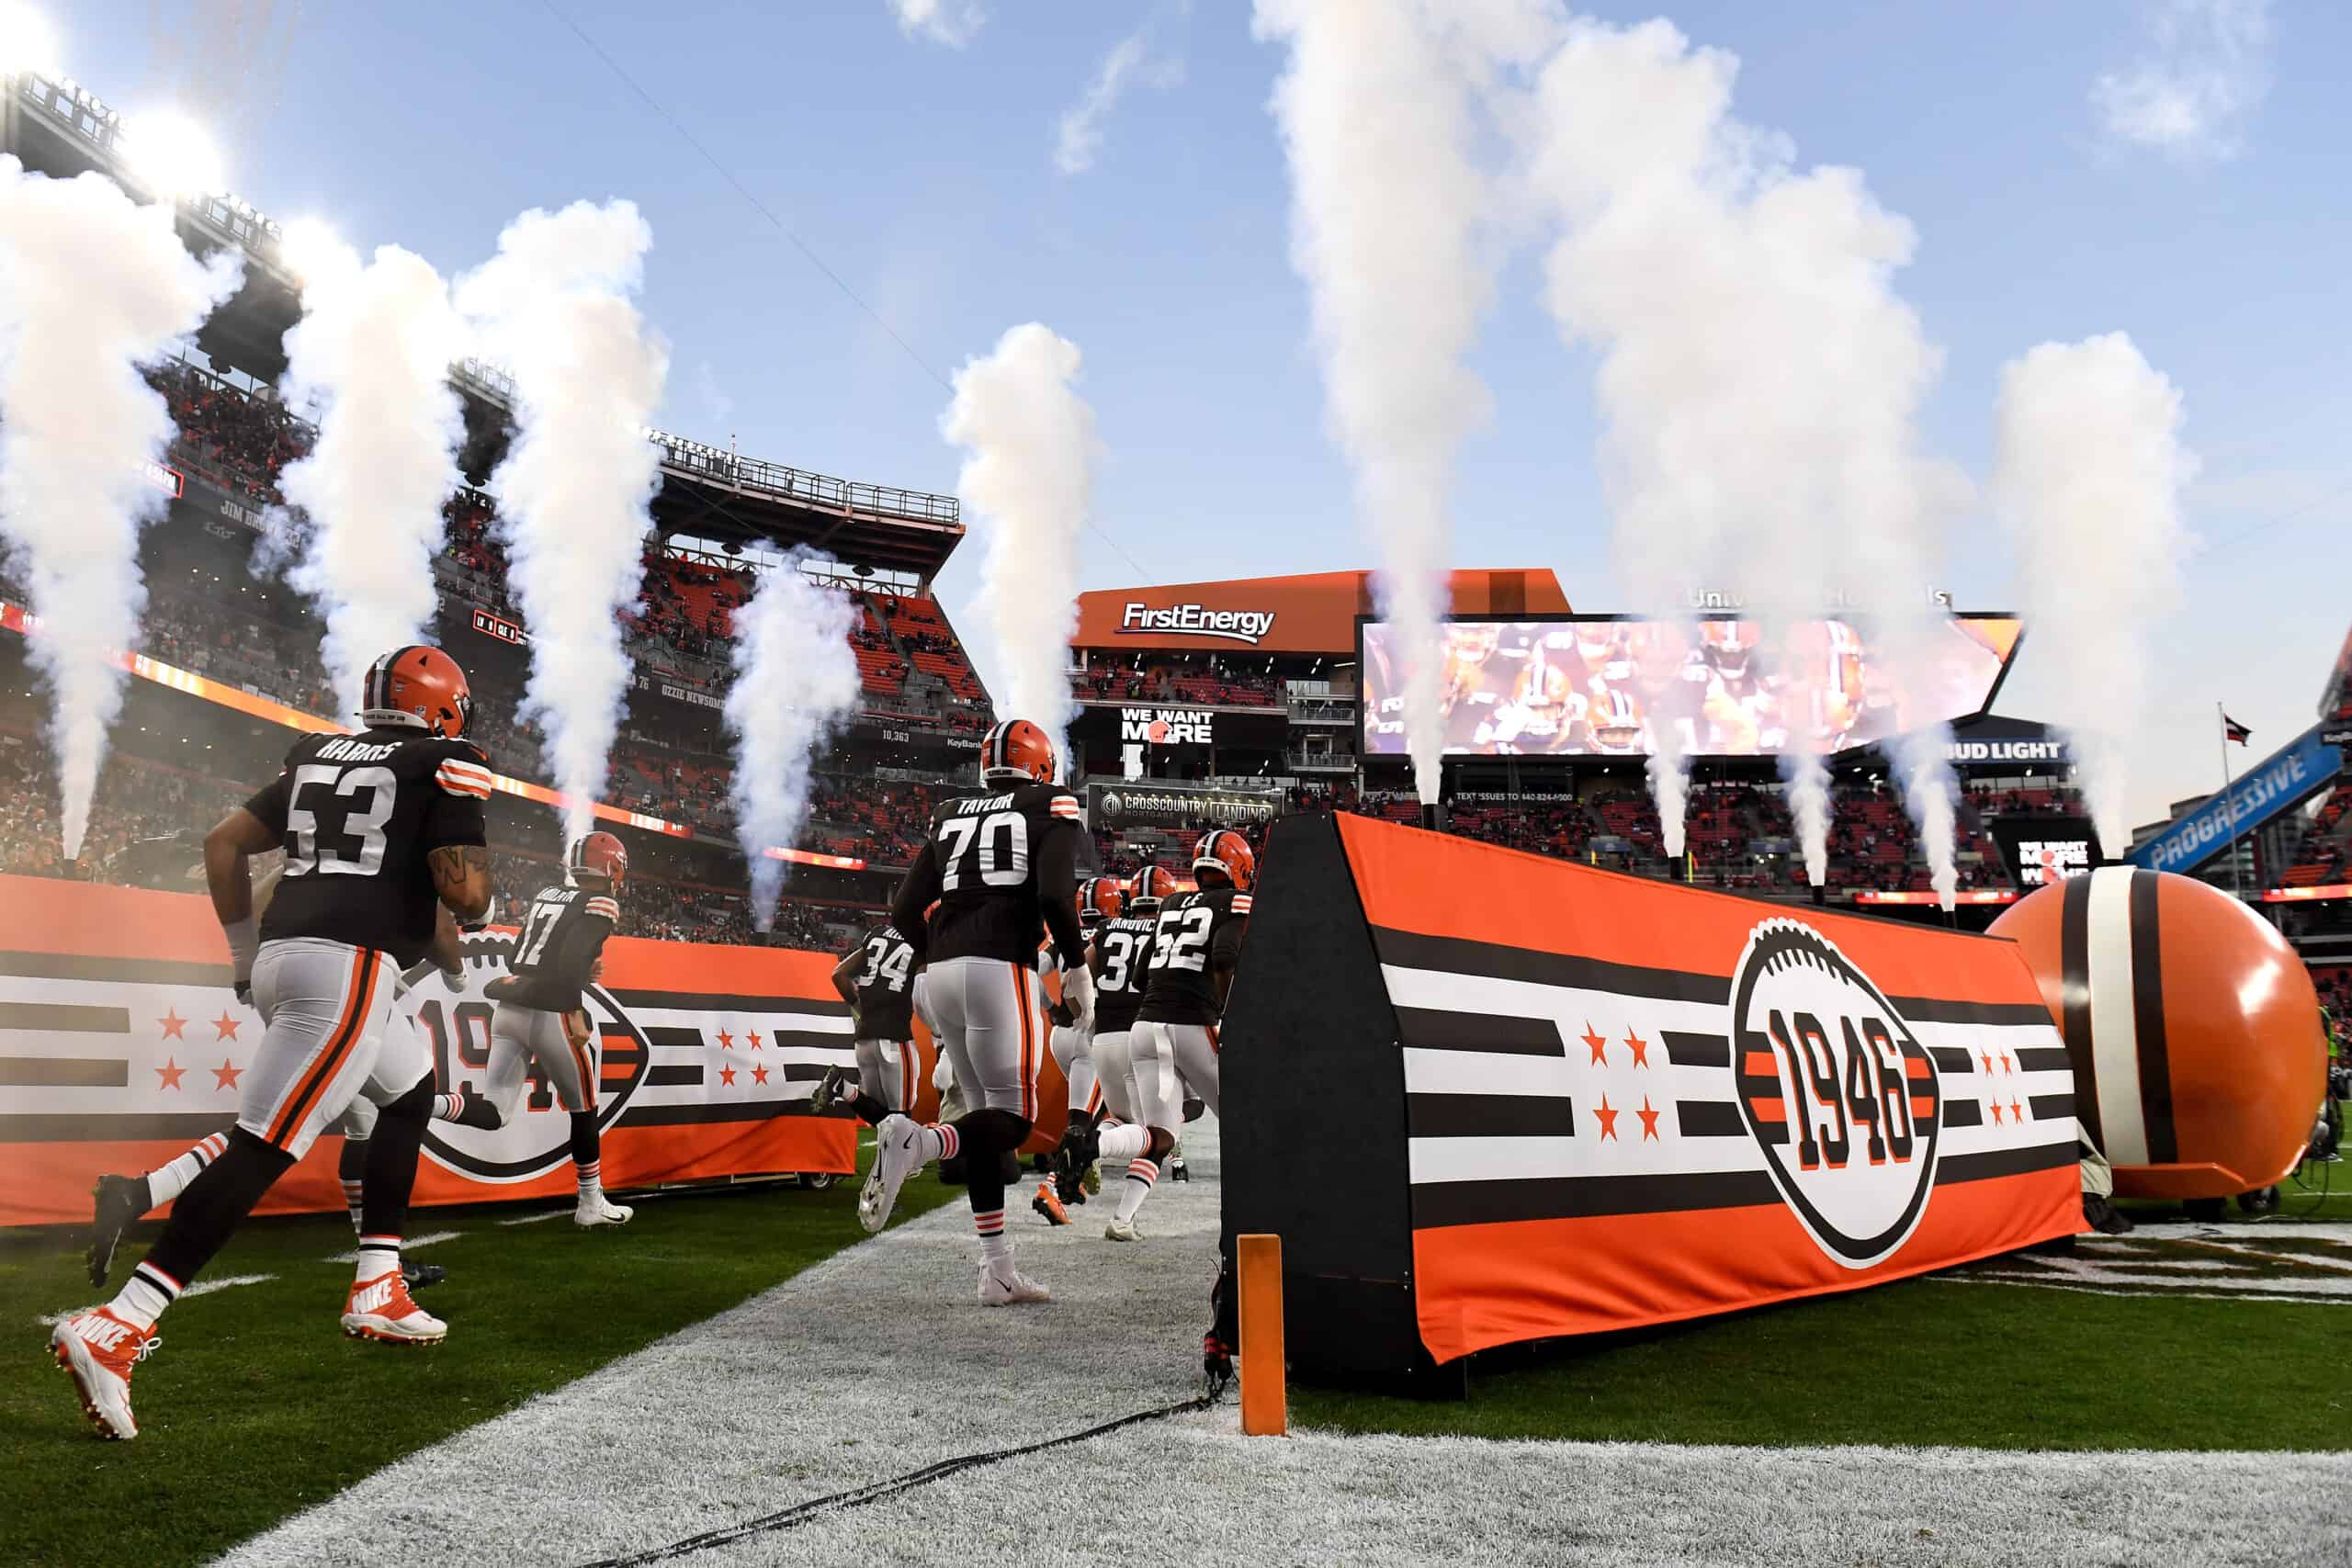 Cleveland Browns players enter the stadium before the game against the Las Vegas Raiders at FirstEnergy Stadium on December 20, 2021 in Cleveland, Ohio.